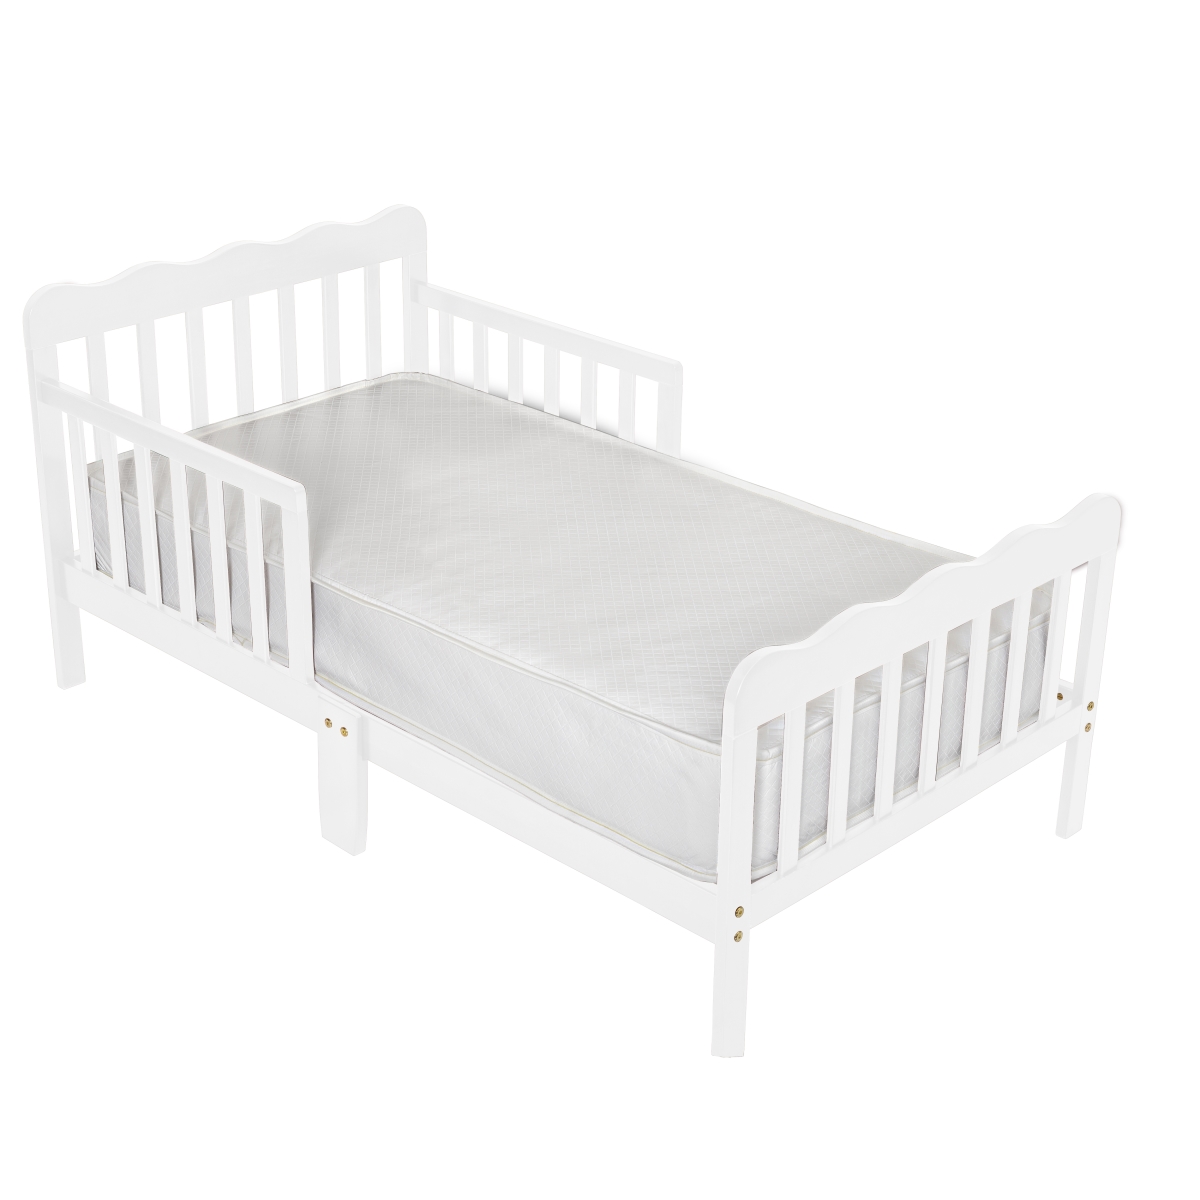 830-w Wood Toddler Bed, White